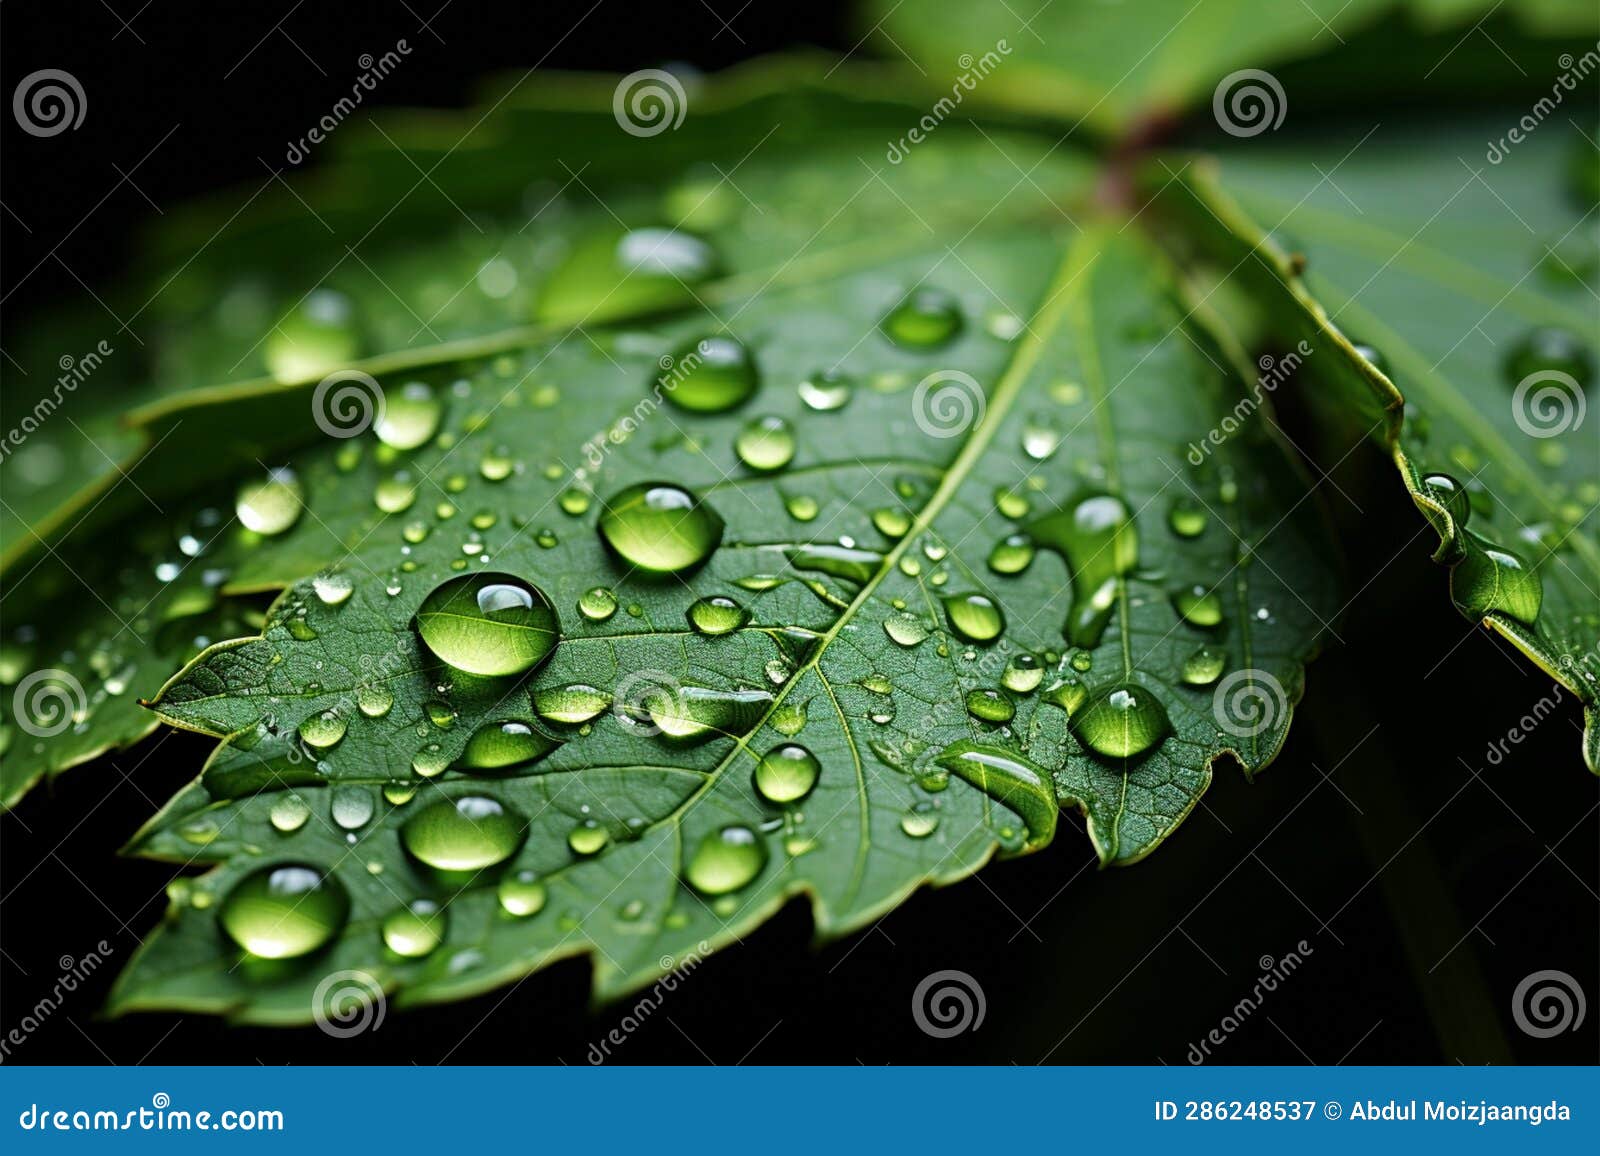 microcosmic view water drips from leaf